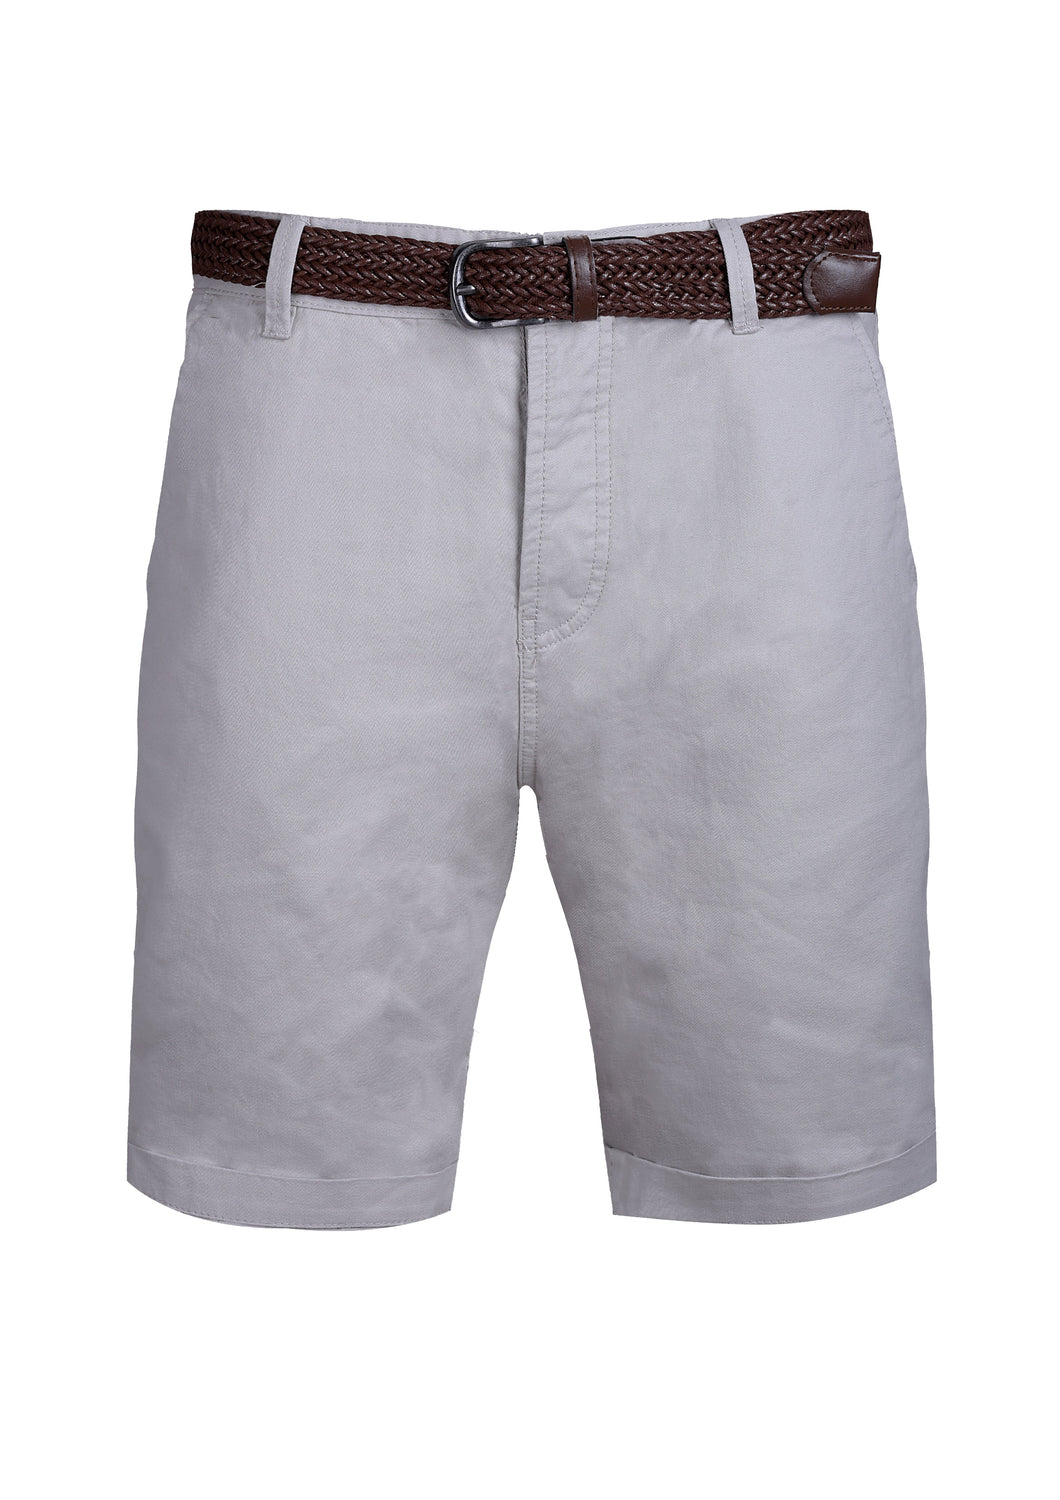 TAILORED CHINO SHORTS WITH BELT - ICEGREY